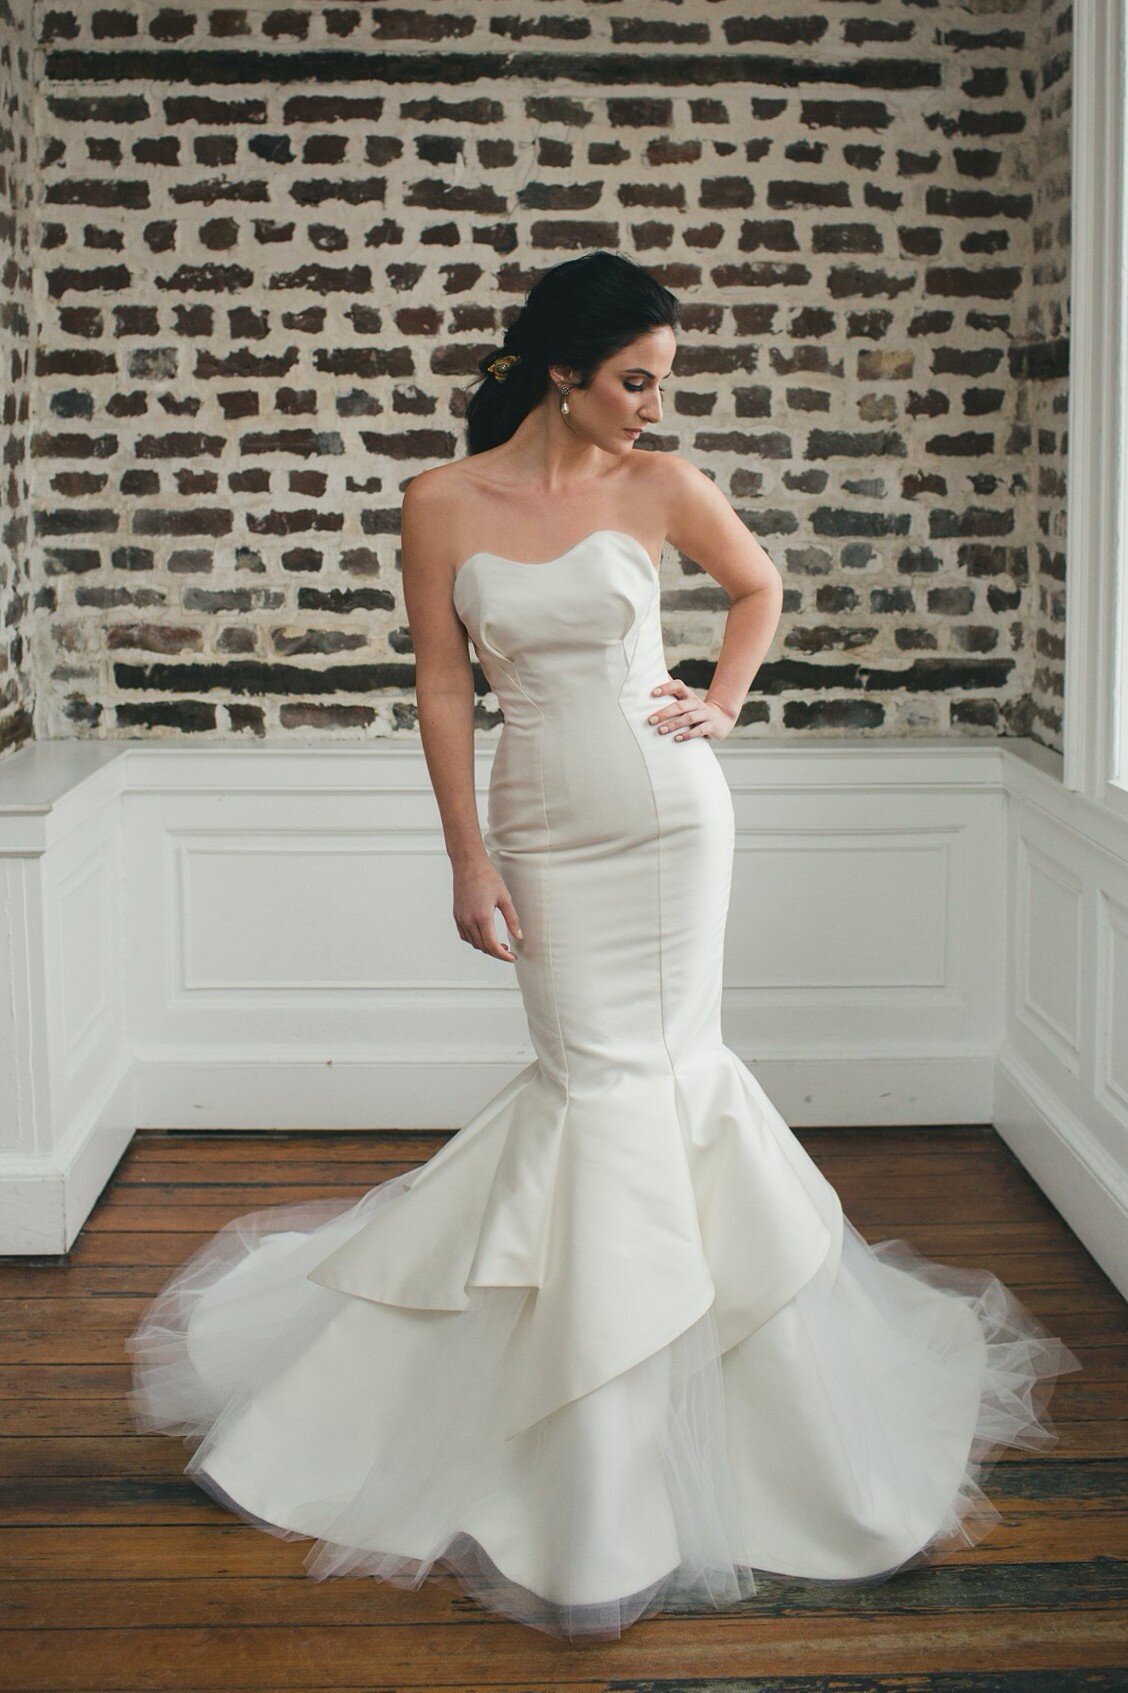 Amaryllis is a strapless mermaid wedding dress with a unique tulle skirt by indie bridal designer Edith Elan.